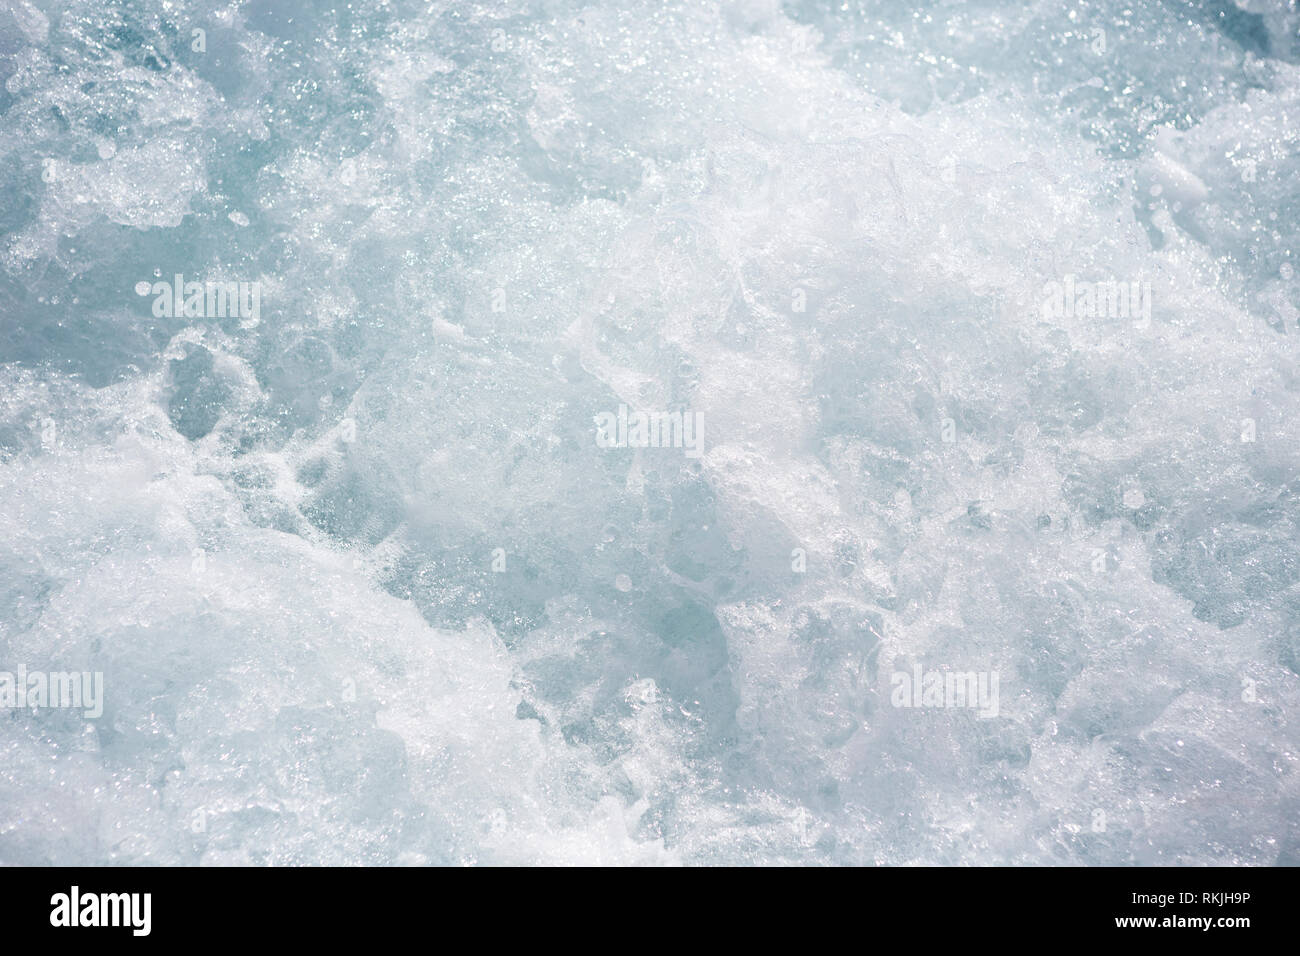 Churned up seawater, overhead and close-up Stock Photo